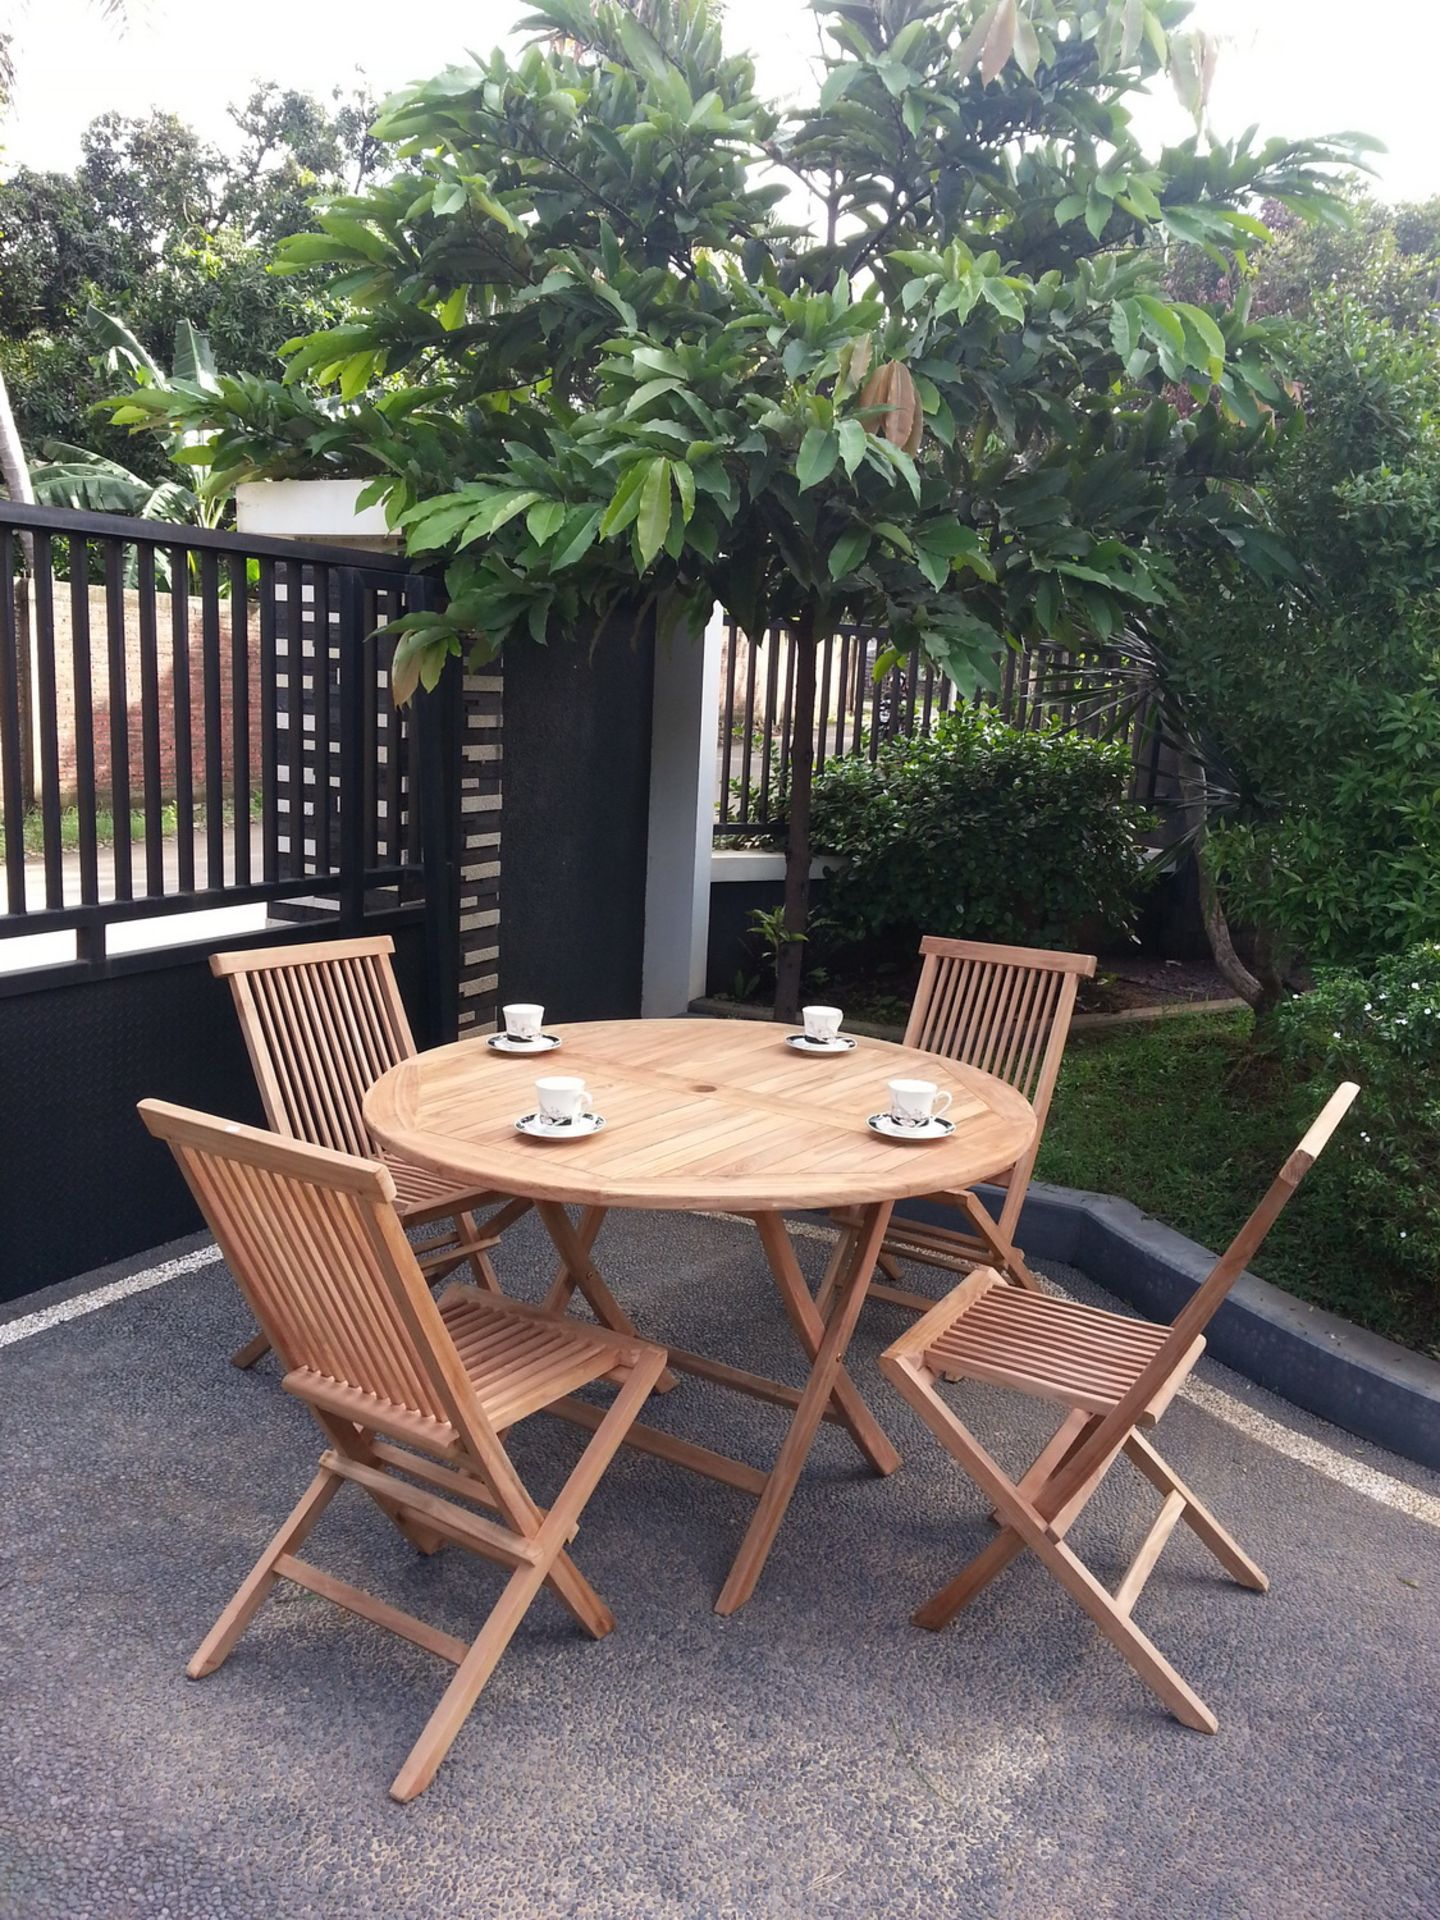 V Brand New Teak 120 cm Folding Table set / including 4 folding chairs and 4 cushion/ RRP £849.99 (